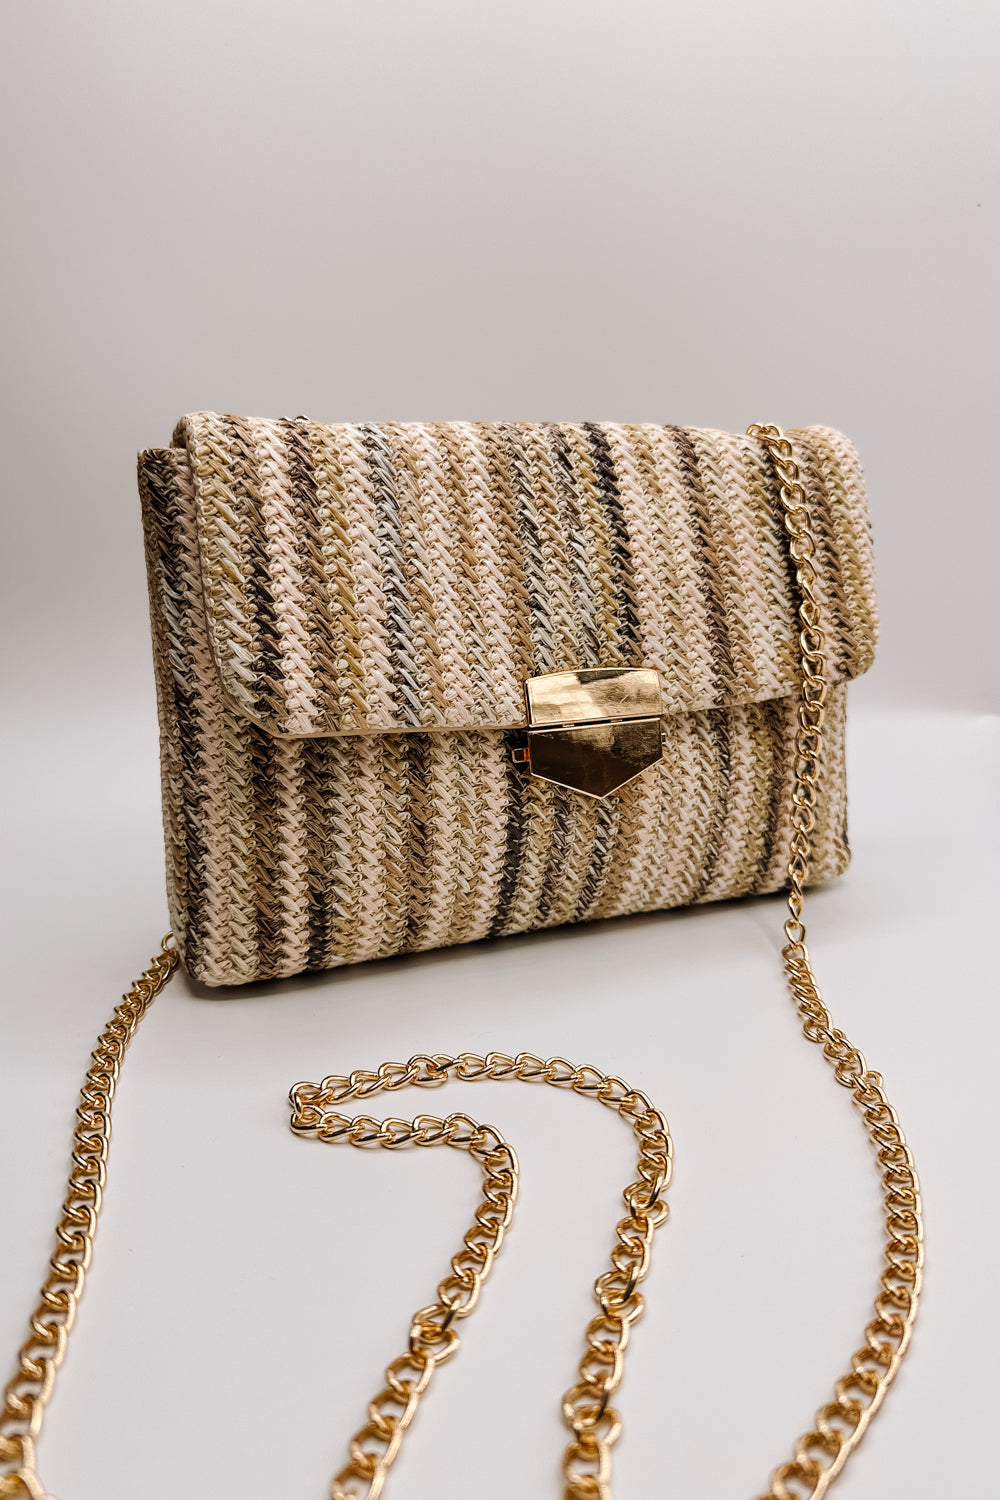 Front view of the Janie Natural Multi Gold Chain Purse which features natural multi woven fabric, gold clasp closure, tan lining, gold hardware and gold chain strap